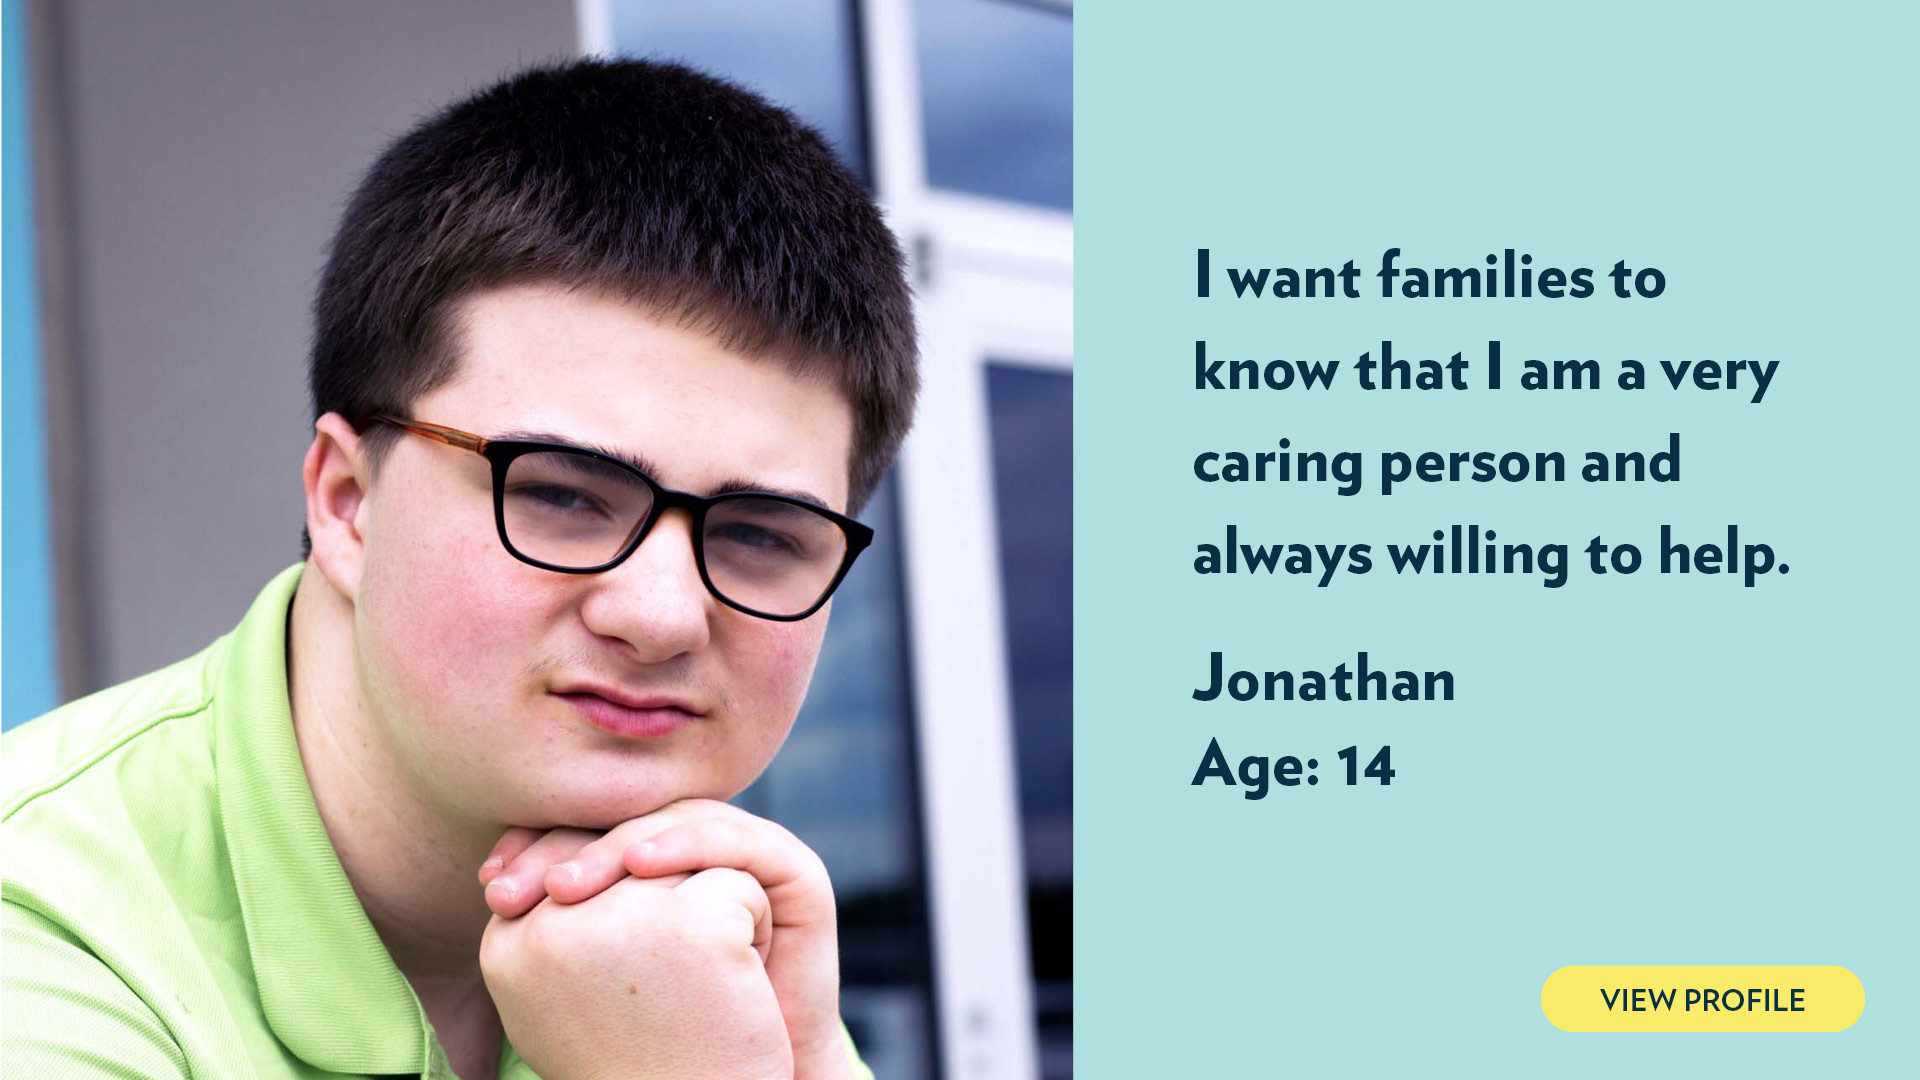 Jonathan, age 14. I want families to know that I am a very caring person and always willing to help. View profile.